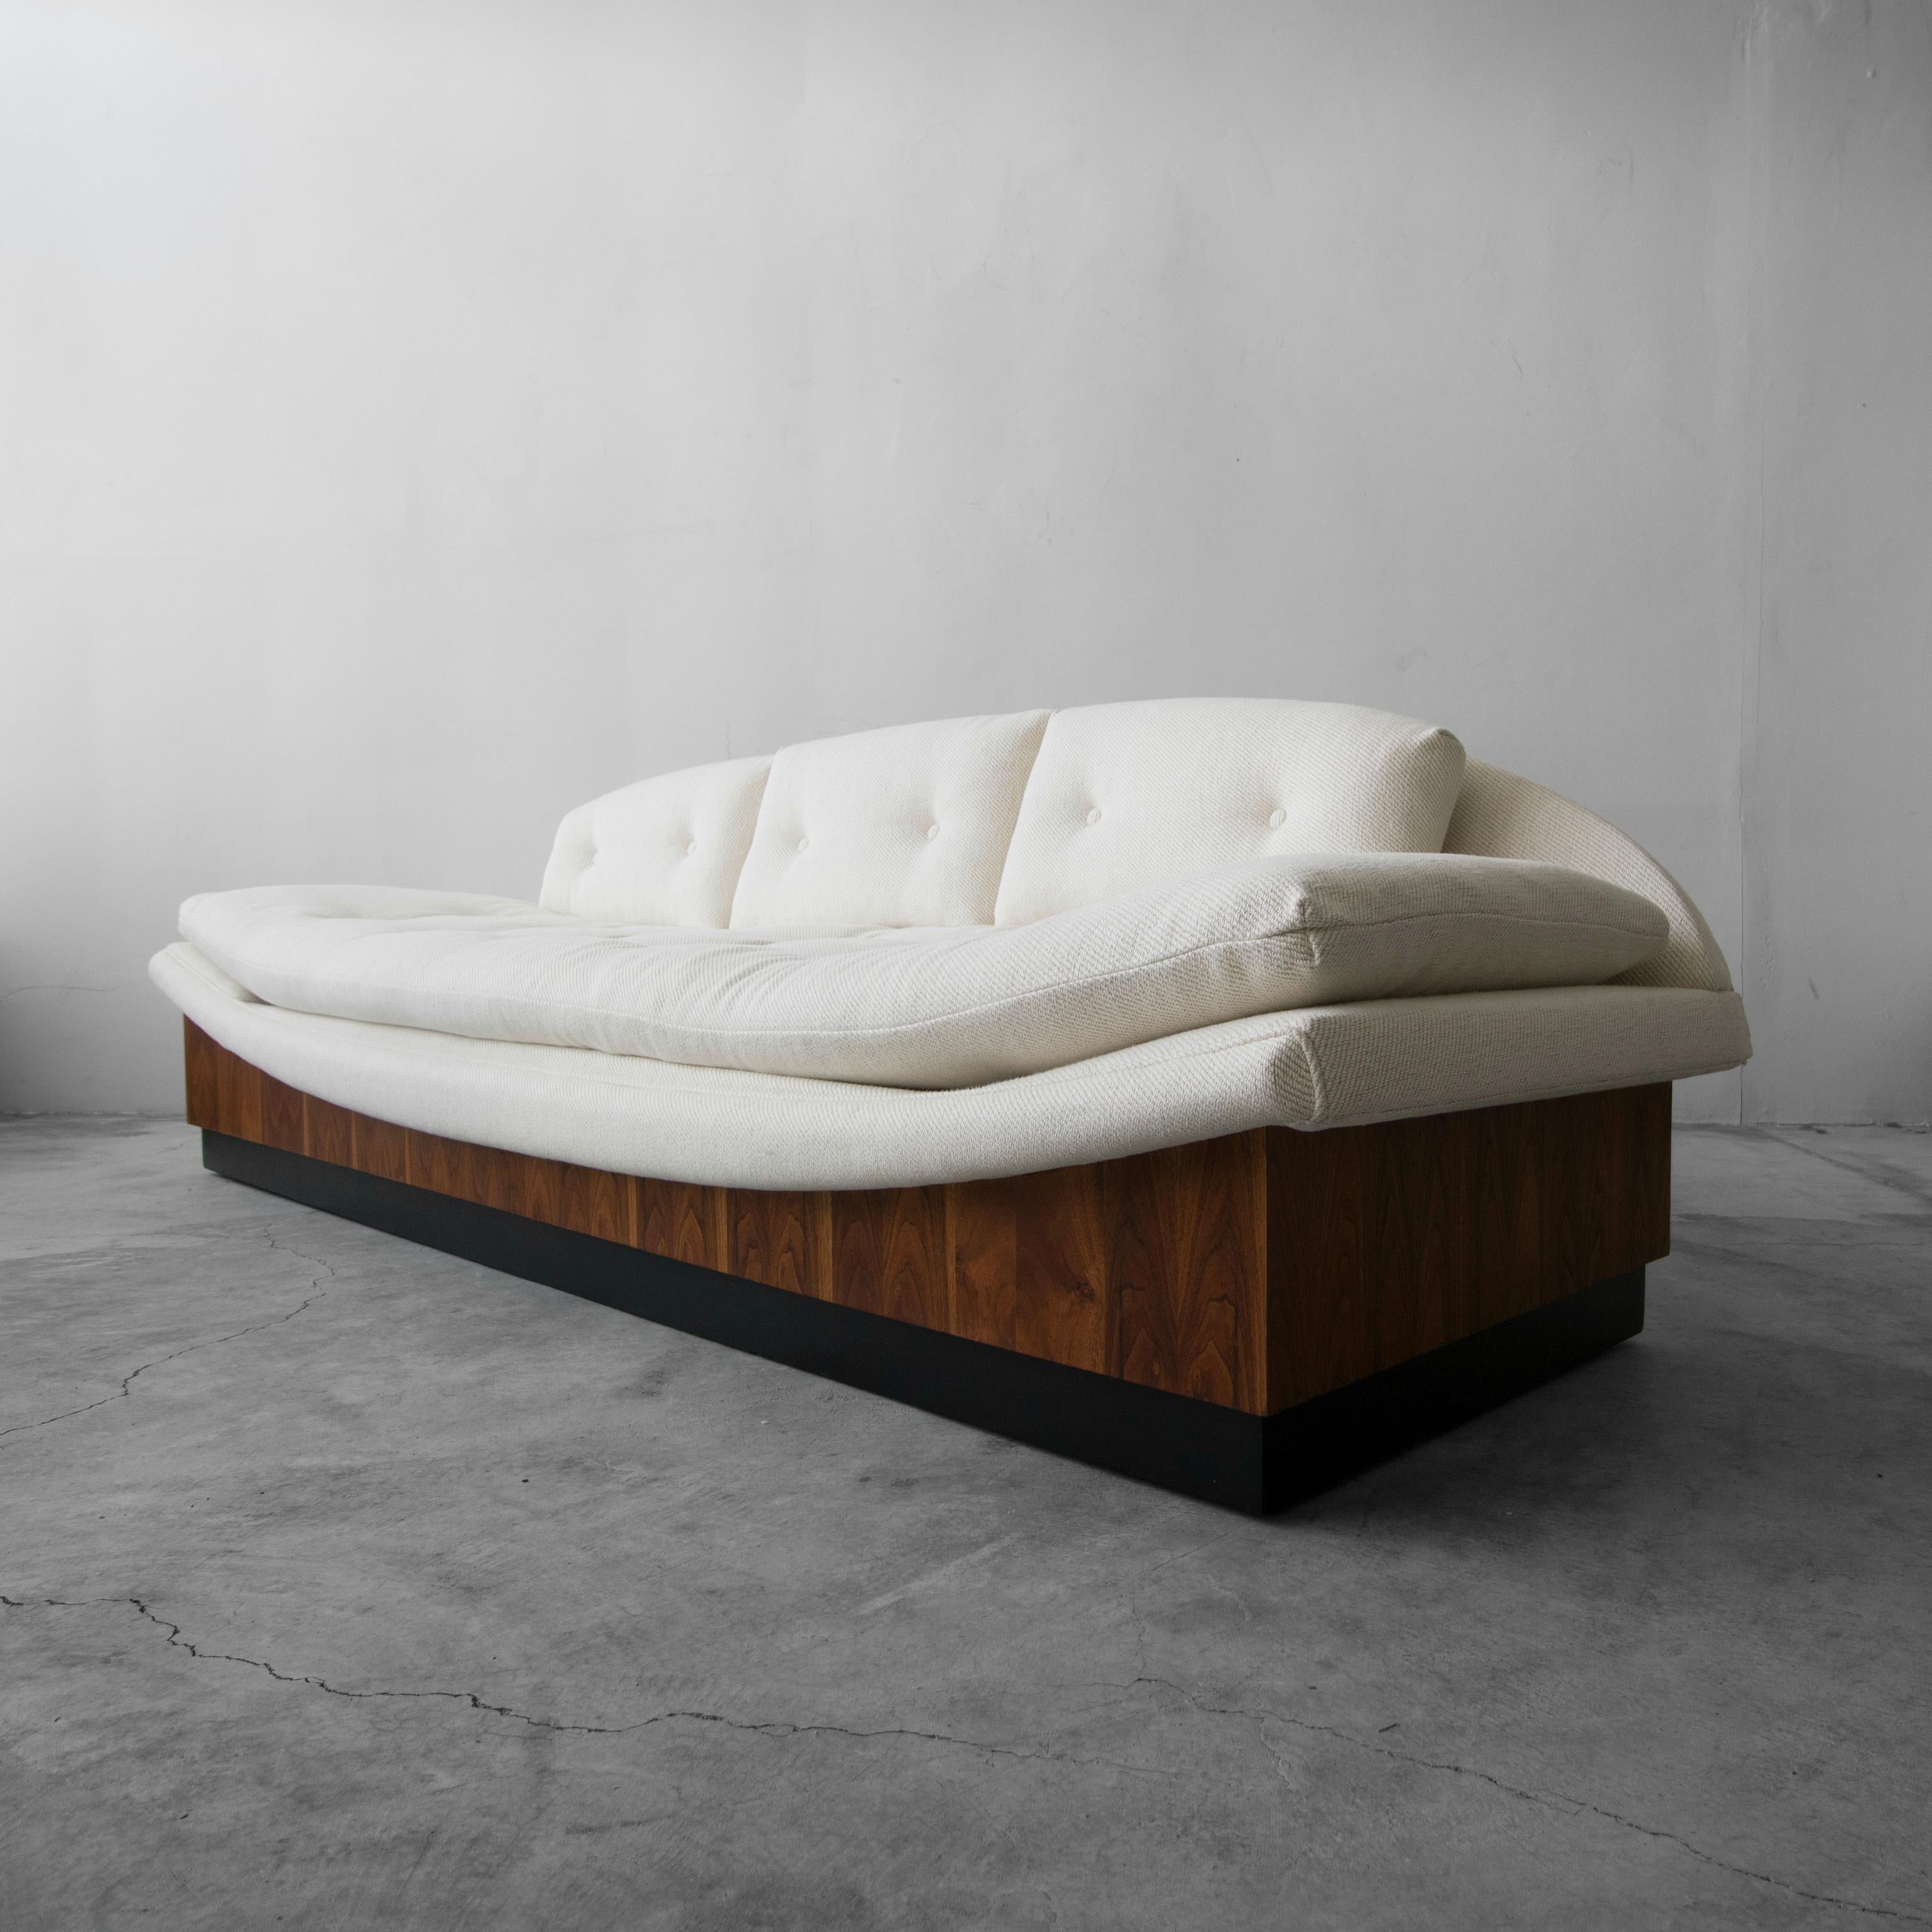 Absolutely stunning floating midcentury gondola sofa by Adrian Pearsall for Craft Associates. Amazing lines and details make it a real show stopper. It measures 9ft in length and is supported by a beautifully grained walnut platform that sits on a